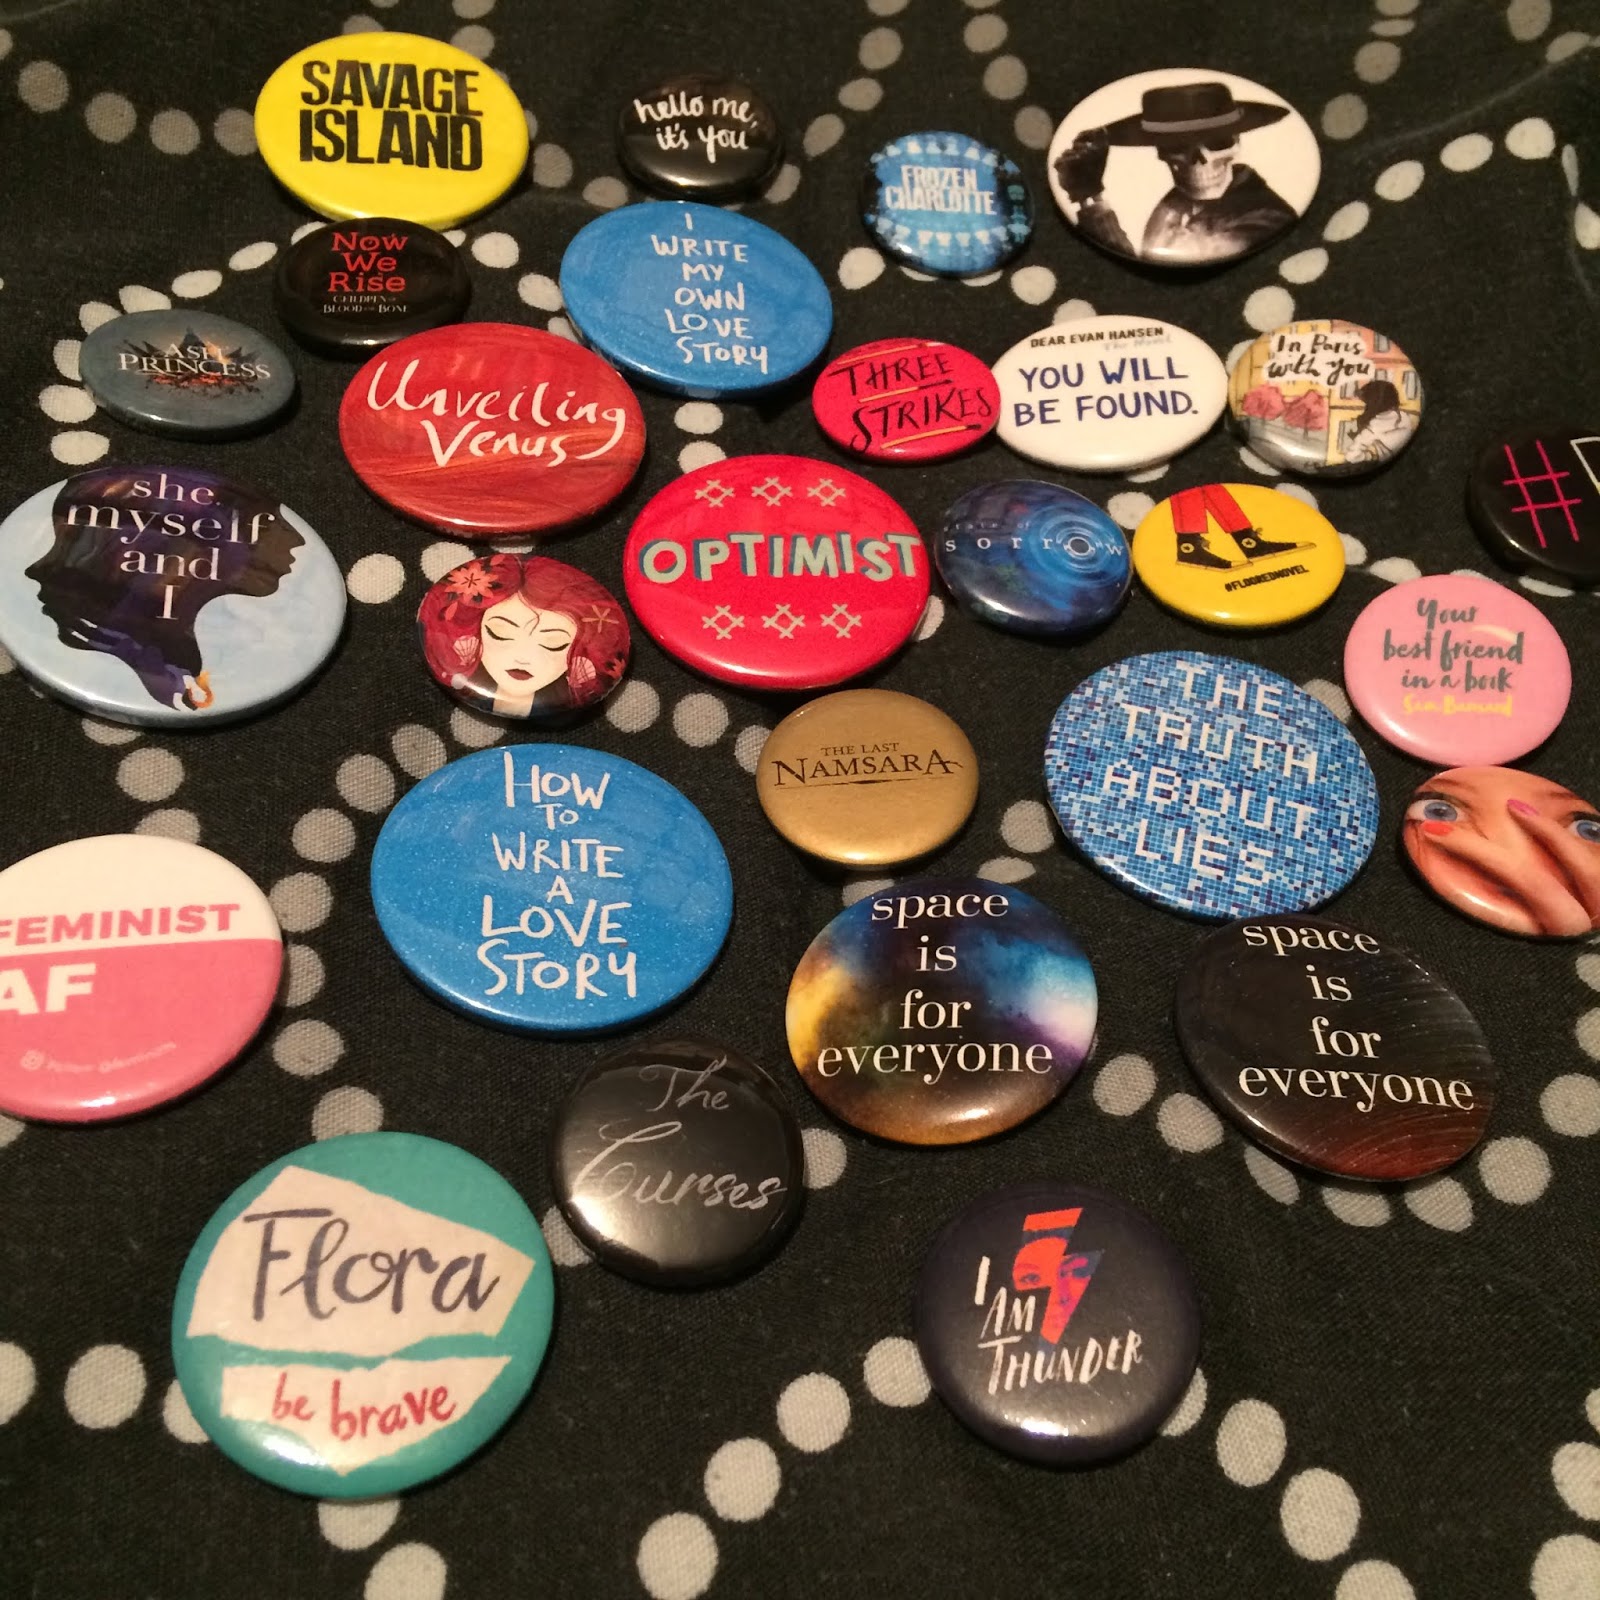 A large number of assorted badges, small and medium sized, with quotes from the books or aspects of book covers